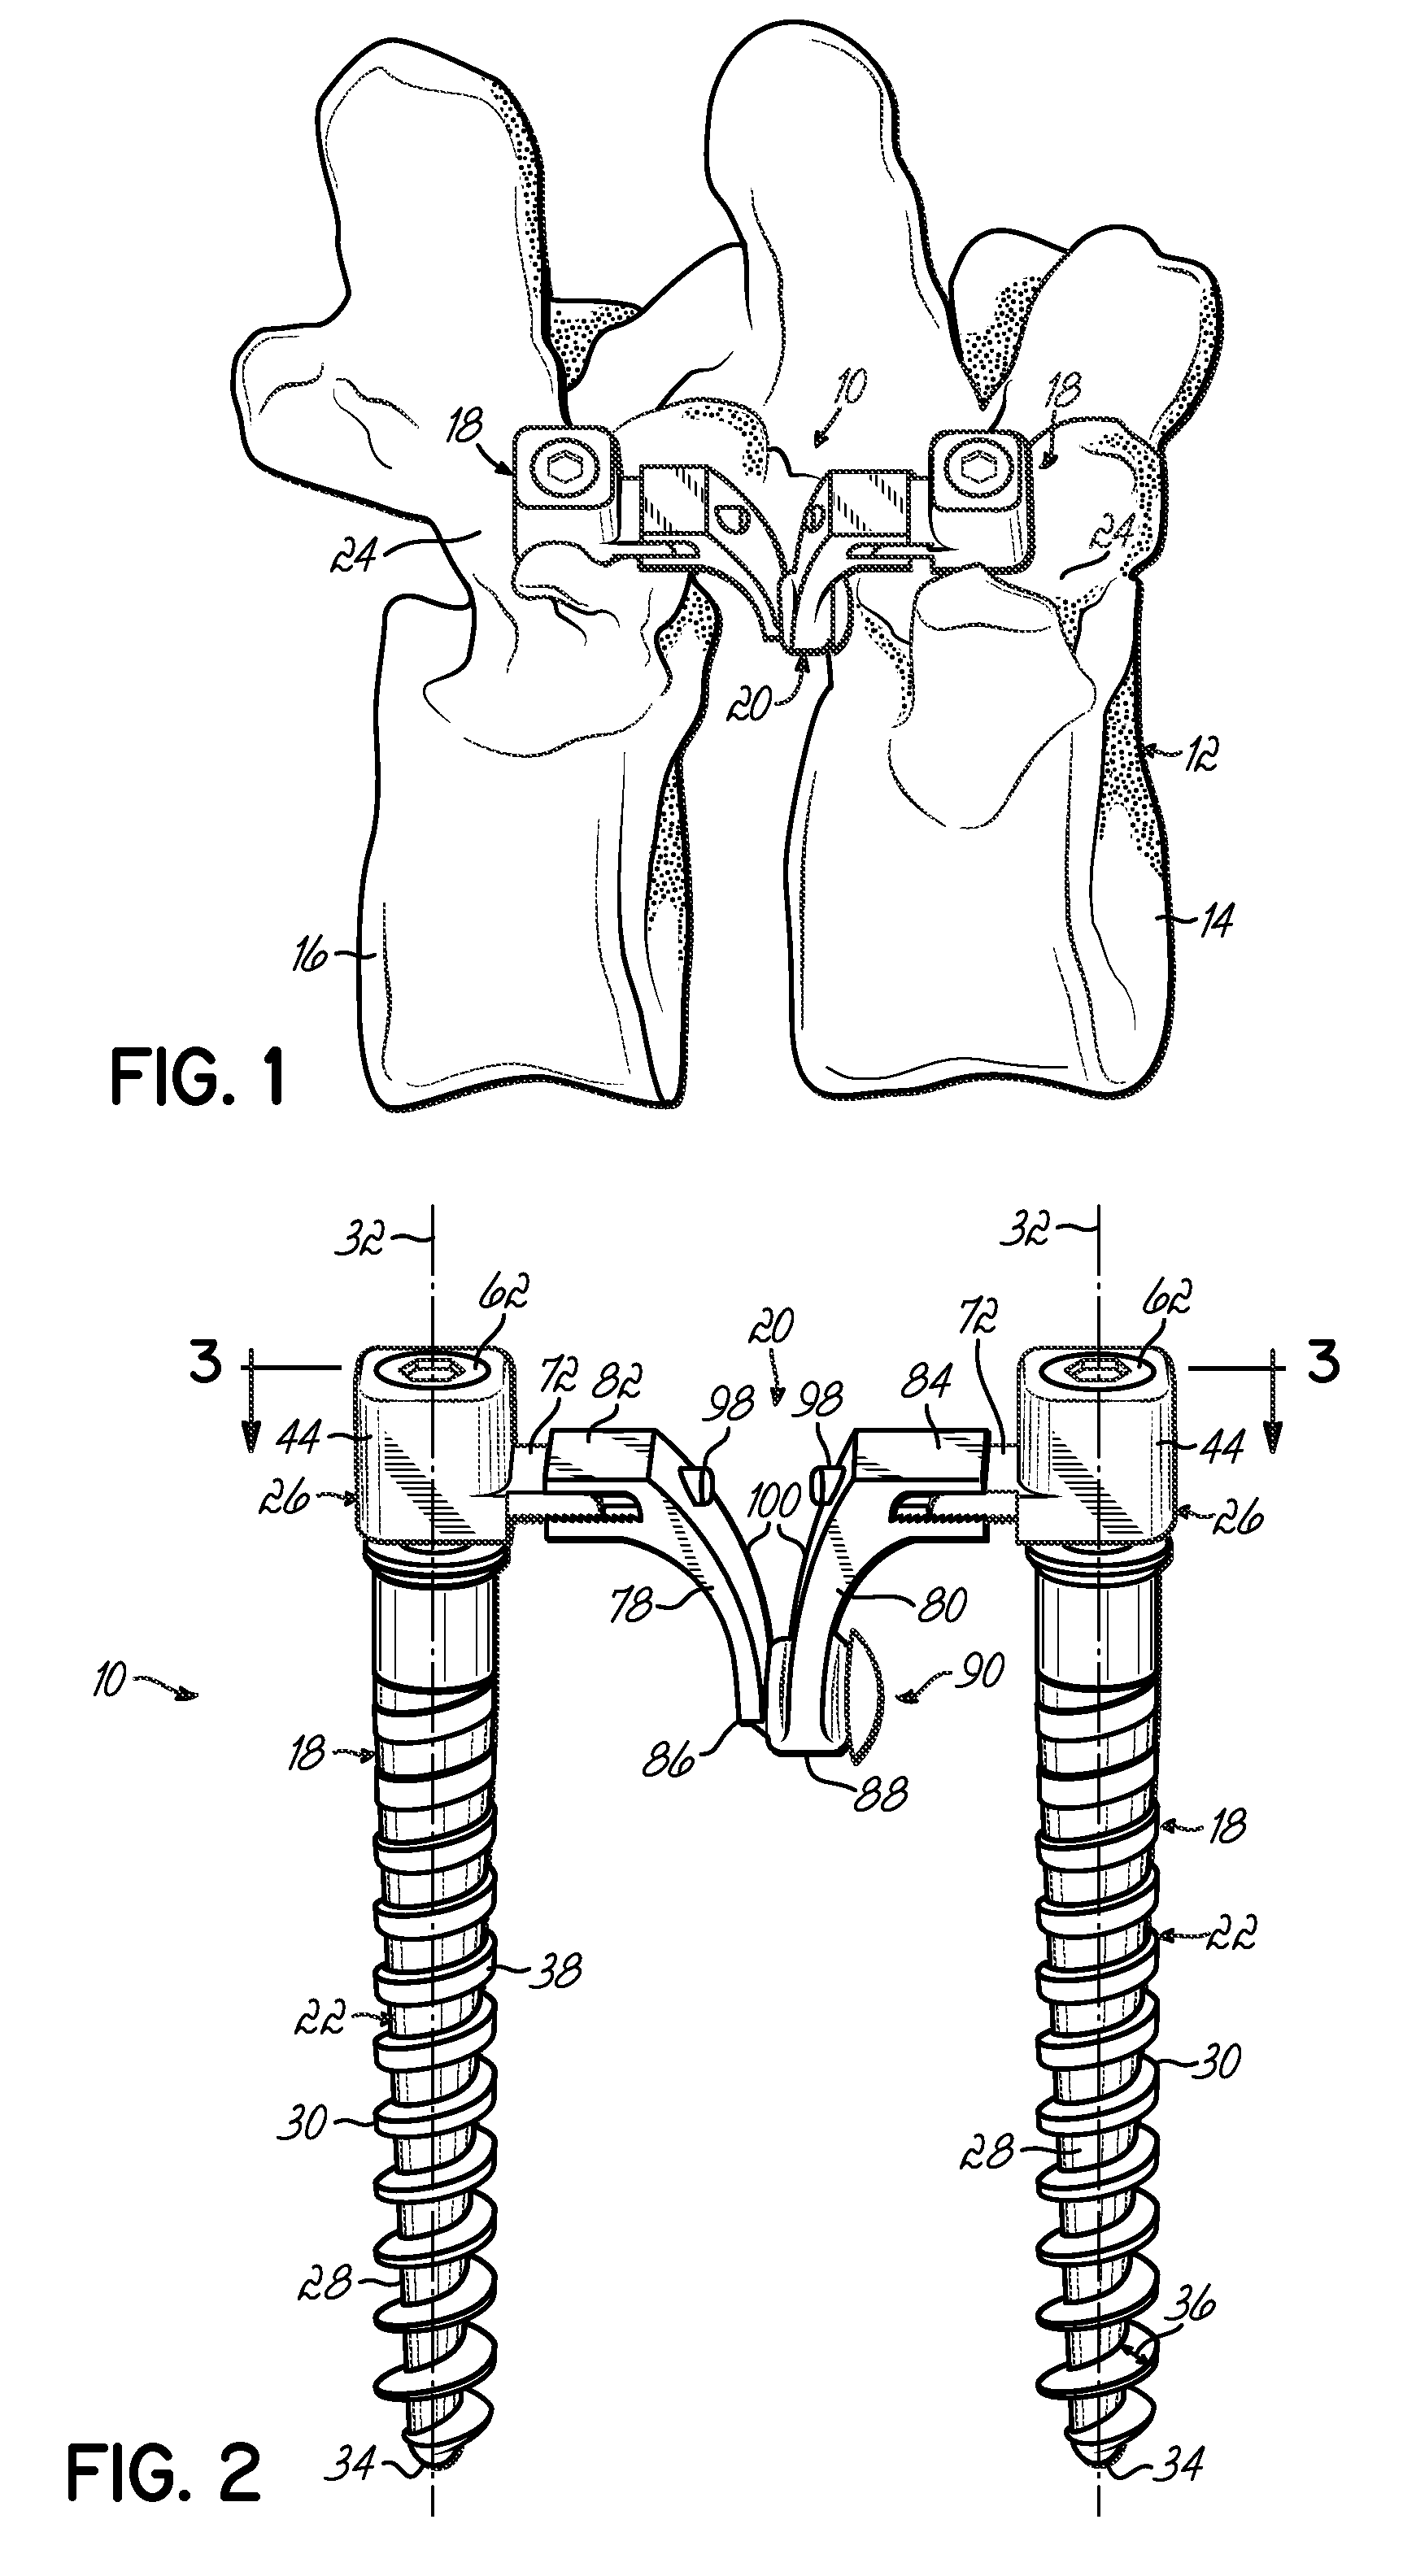 Dynamic spinal stabilization system and method of using the same